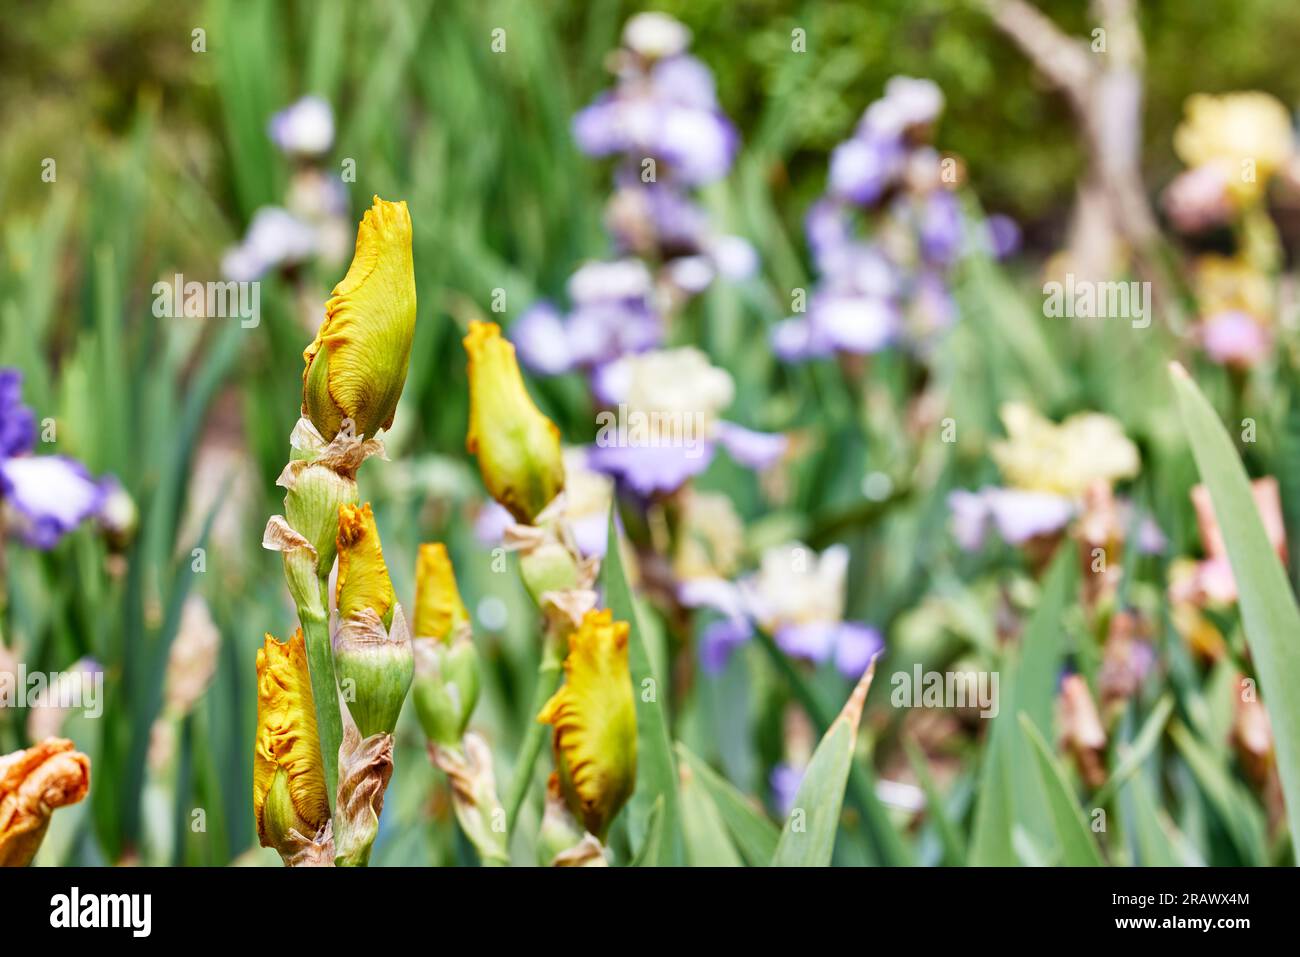 Close up of a Calizona Gold Iris Flower Buds with Shallow depth of Field Stock Photo